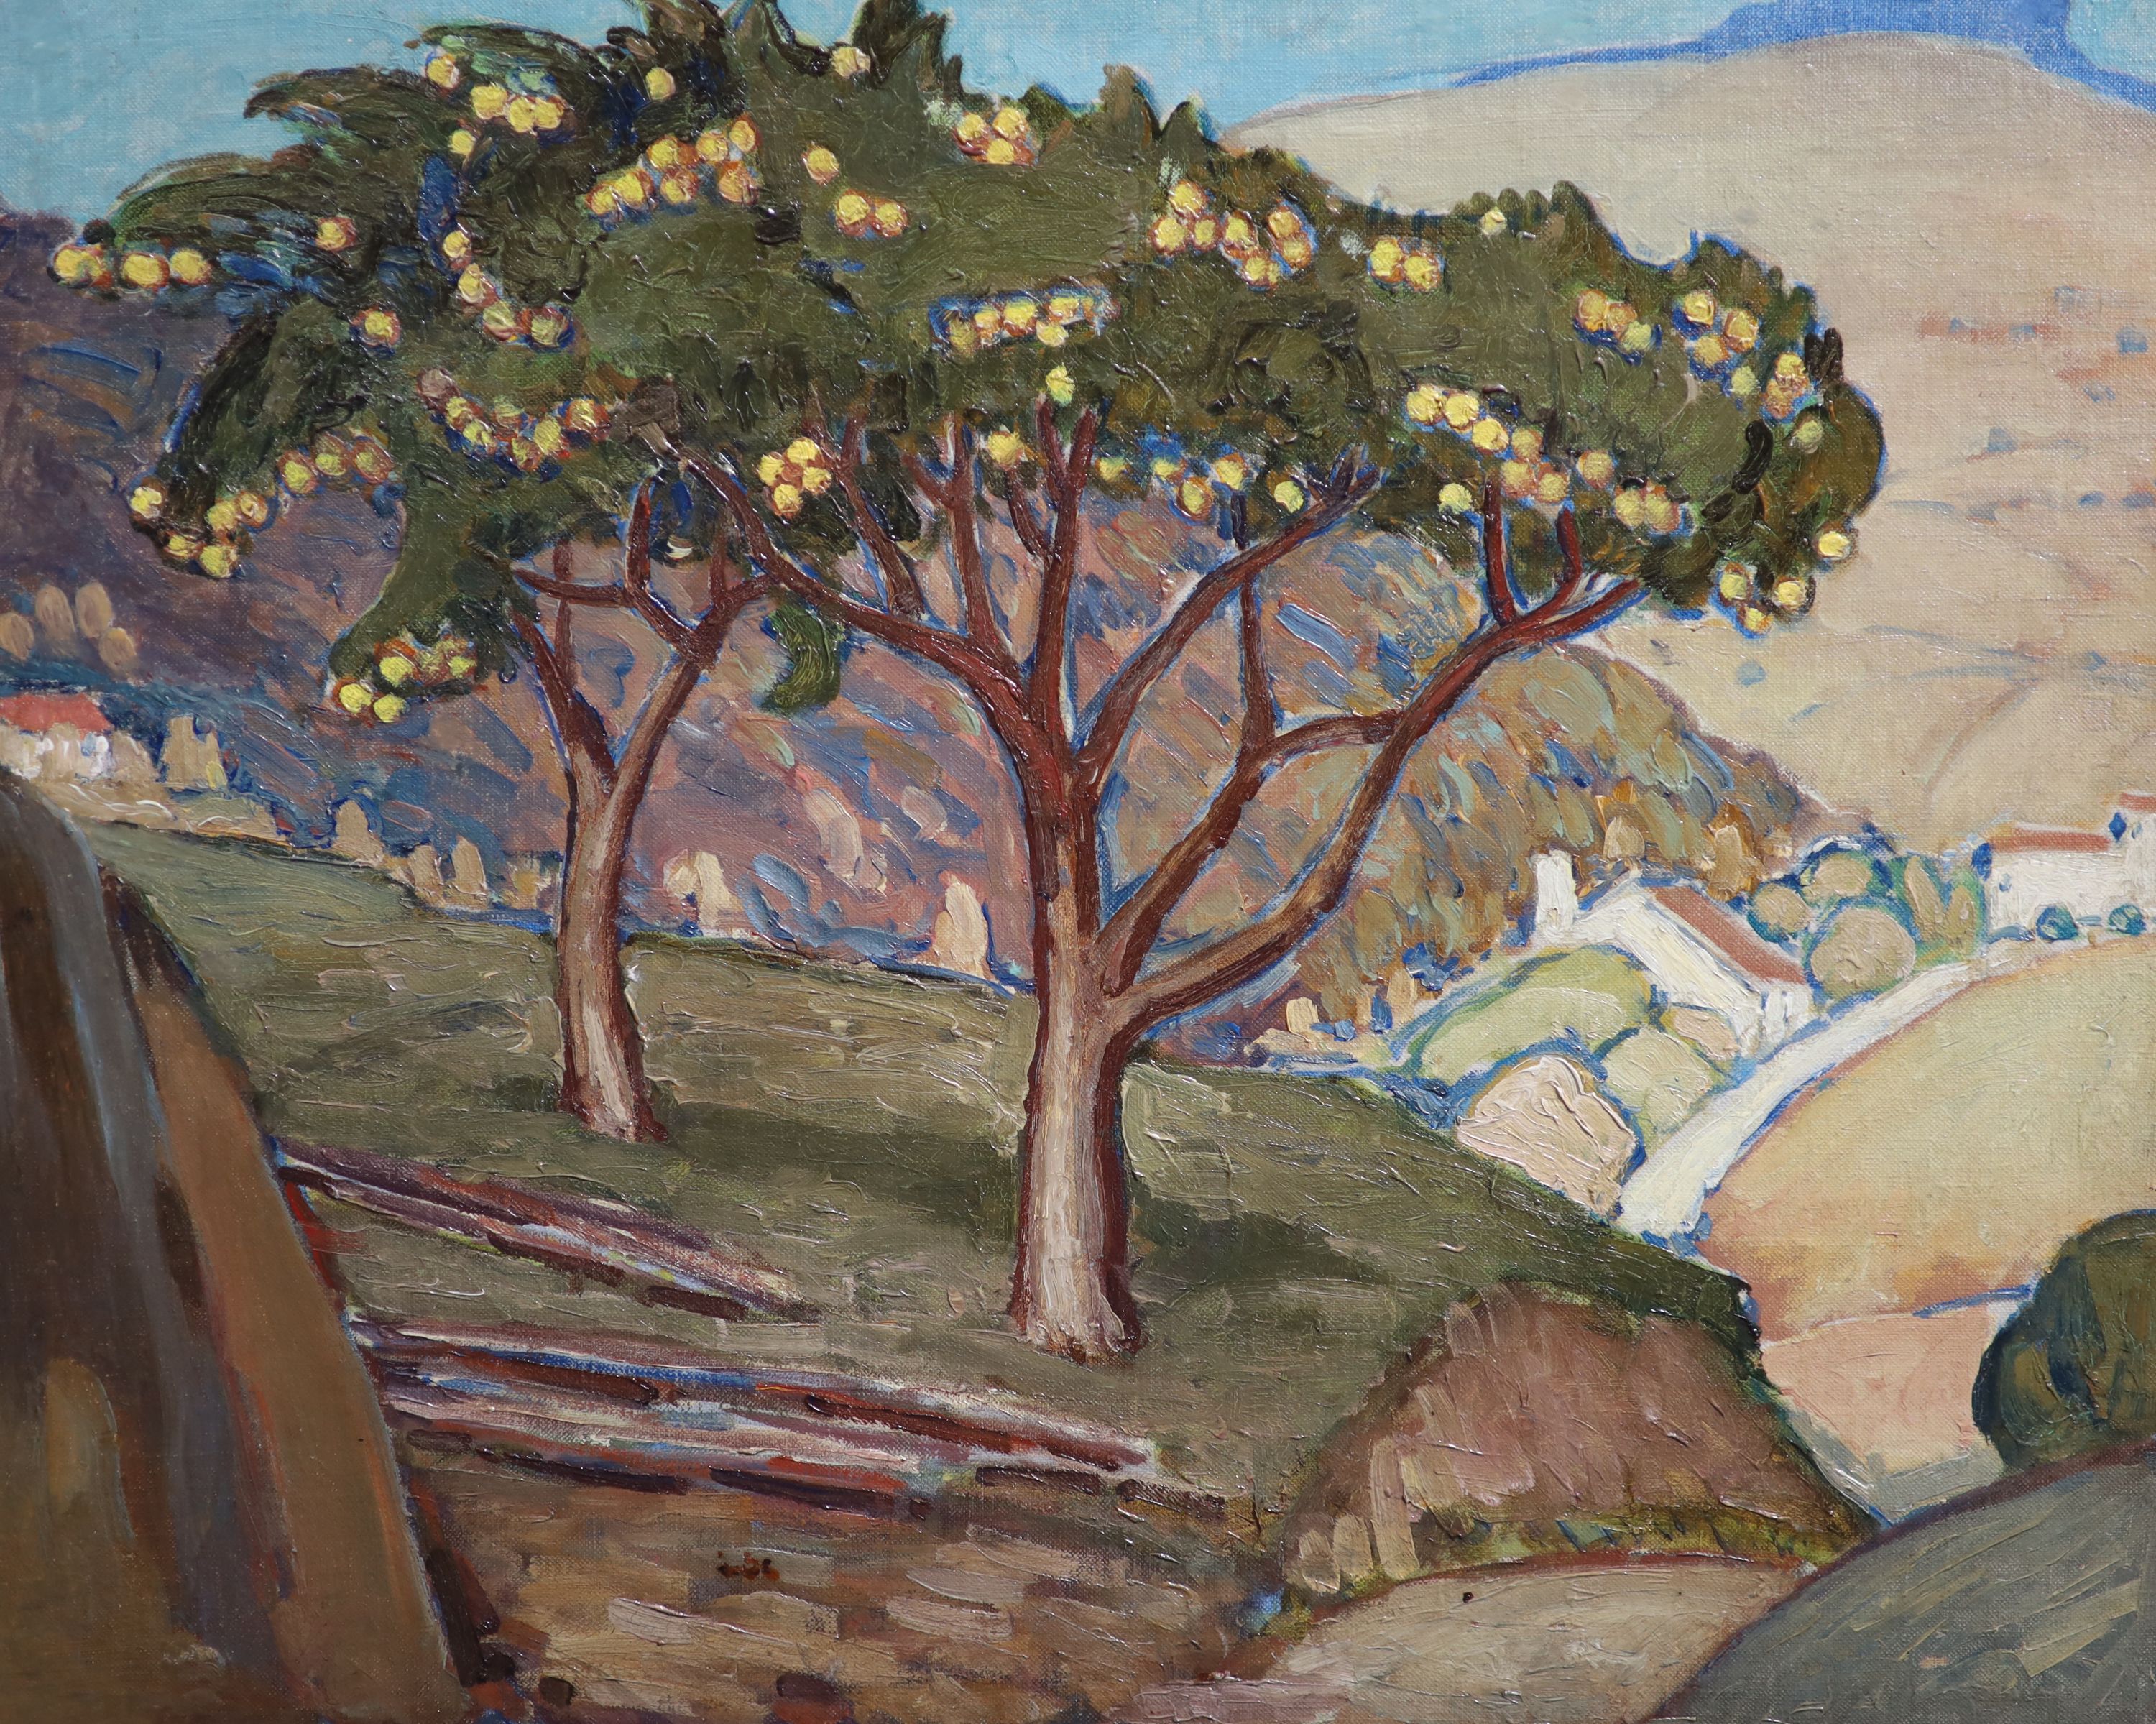 Thomas Brown Yates (1882-1968), Landscape with orange trees, Oil on canvas, 51 x 60 cm. unframed